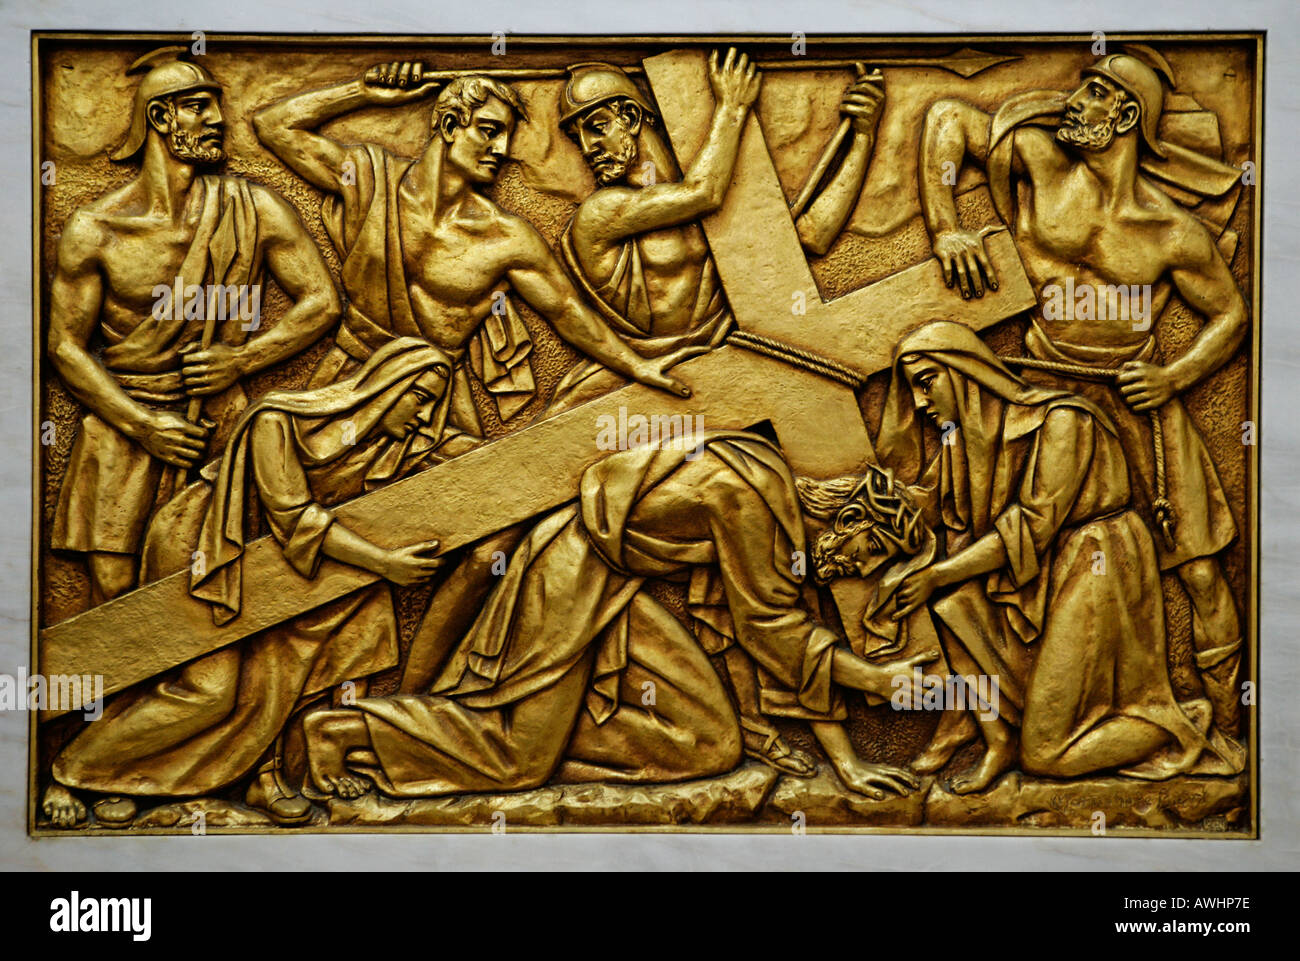 A gold plated bas relief depicting Christ carrying the cross This relief is to be found in the church at Fatima Portugal Stock Photo